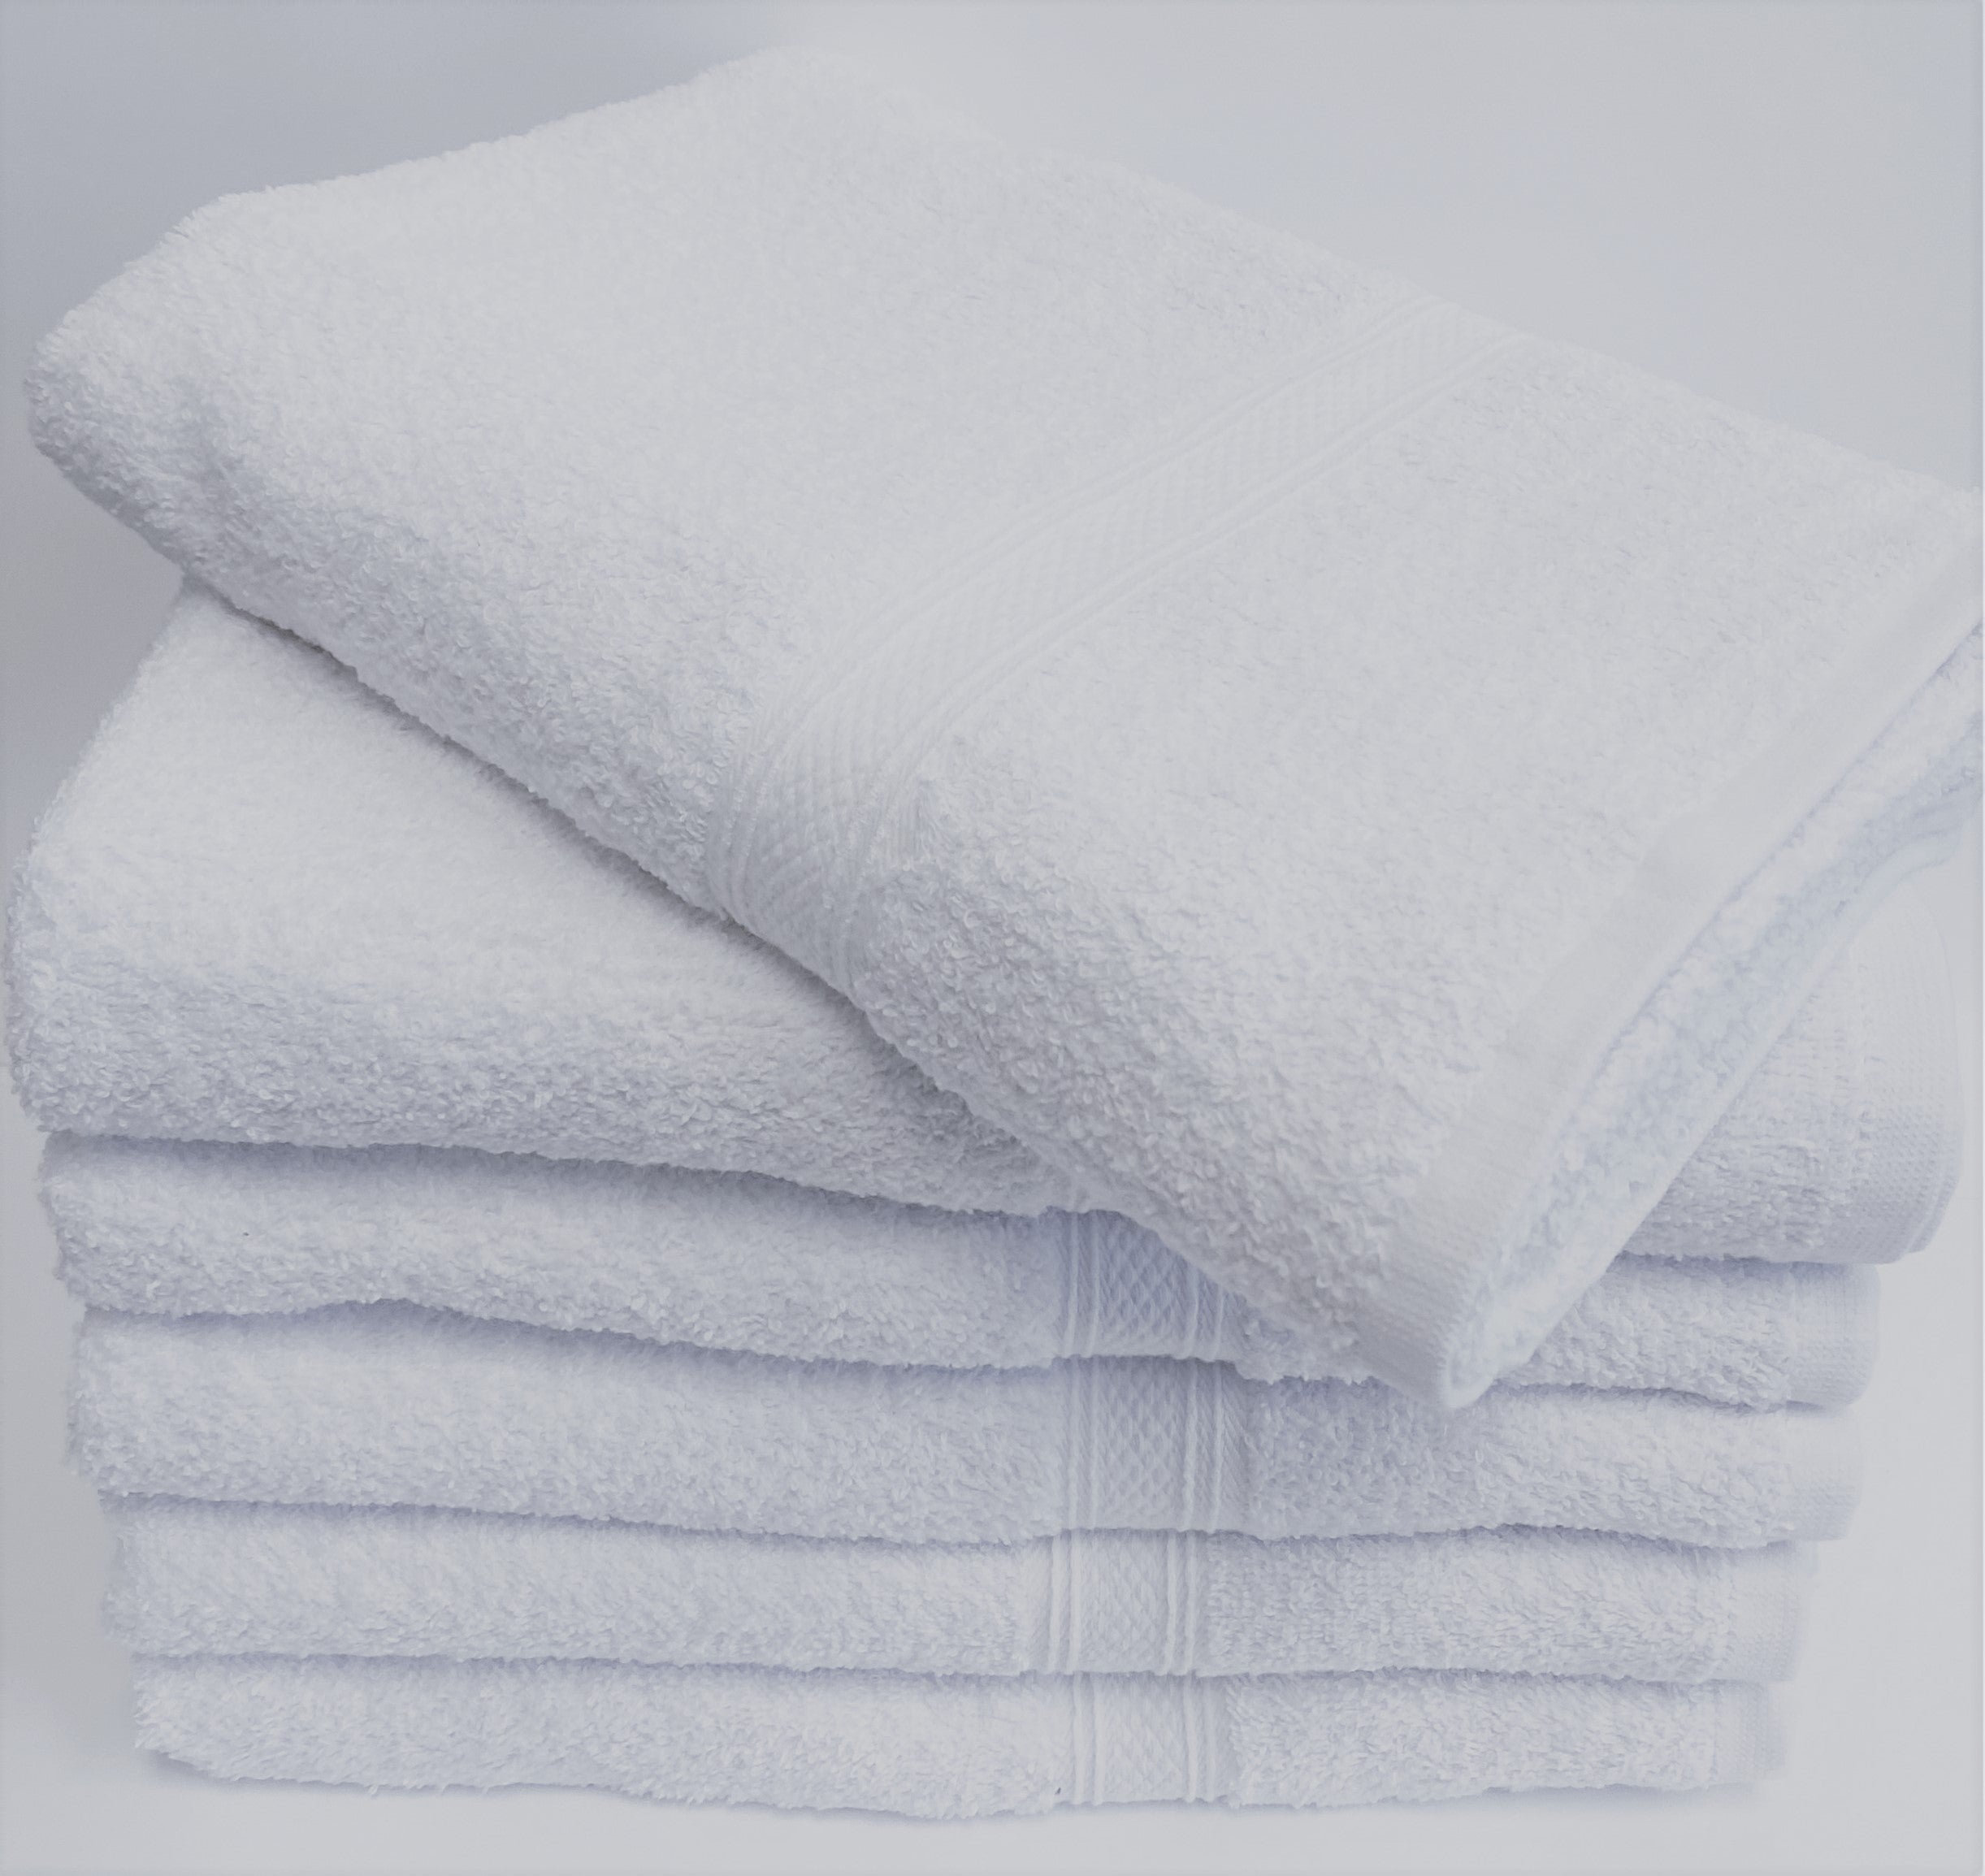 Premium Hotel Hand Towels 16x27 3.25 lb 100% Ringspun Cotton with Dobby  Border - Case of 12